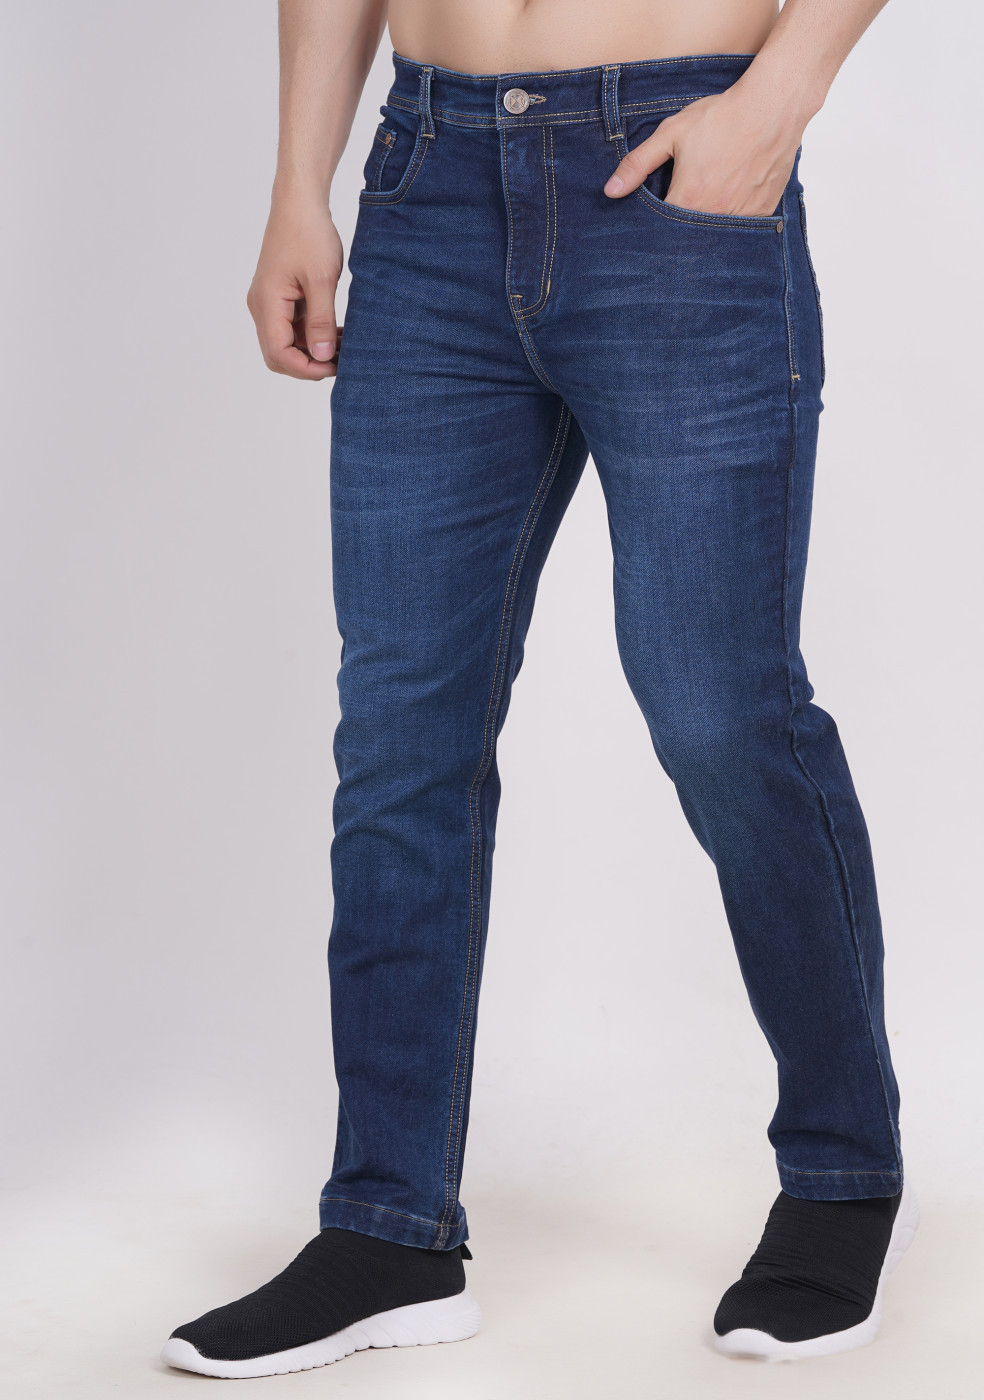 New Collection Of Men's Jeans